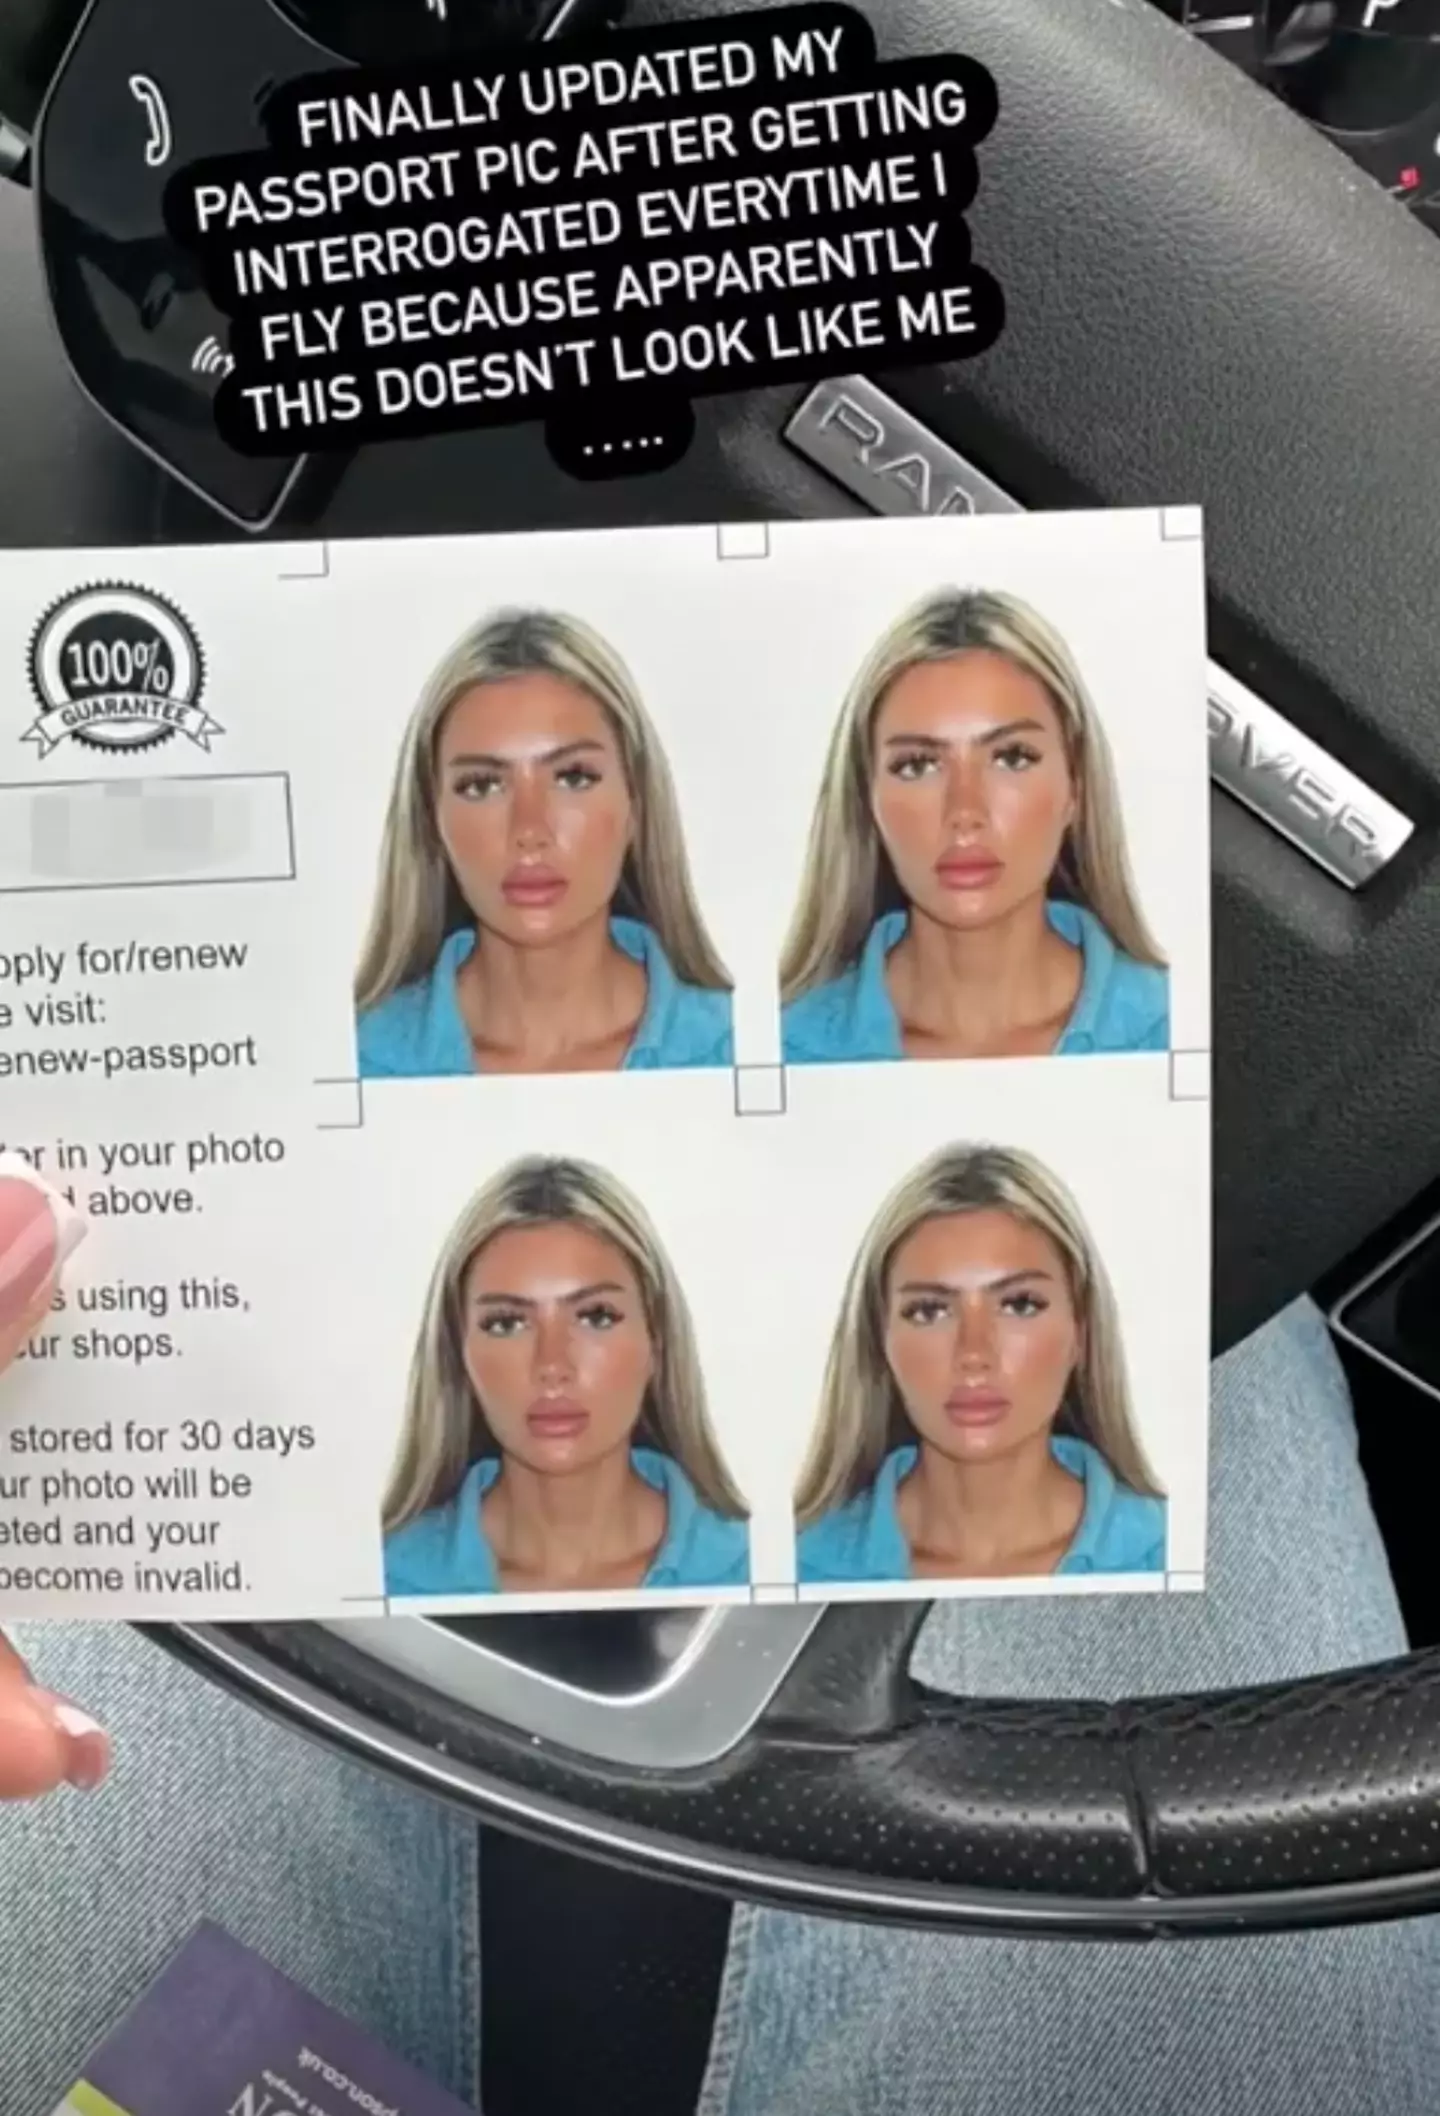 Joanne Prophet revealed the reason she had to get a new passport photo.